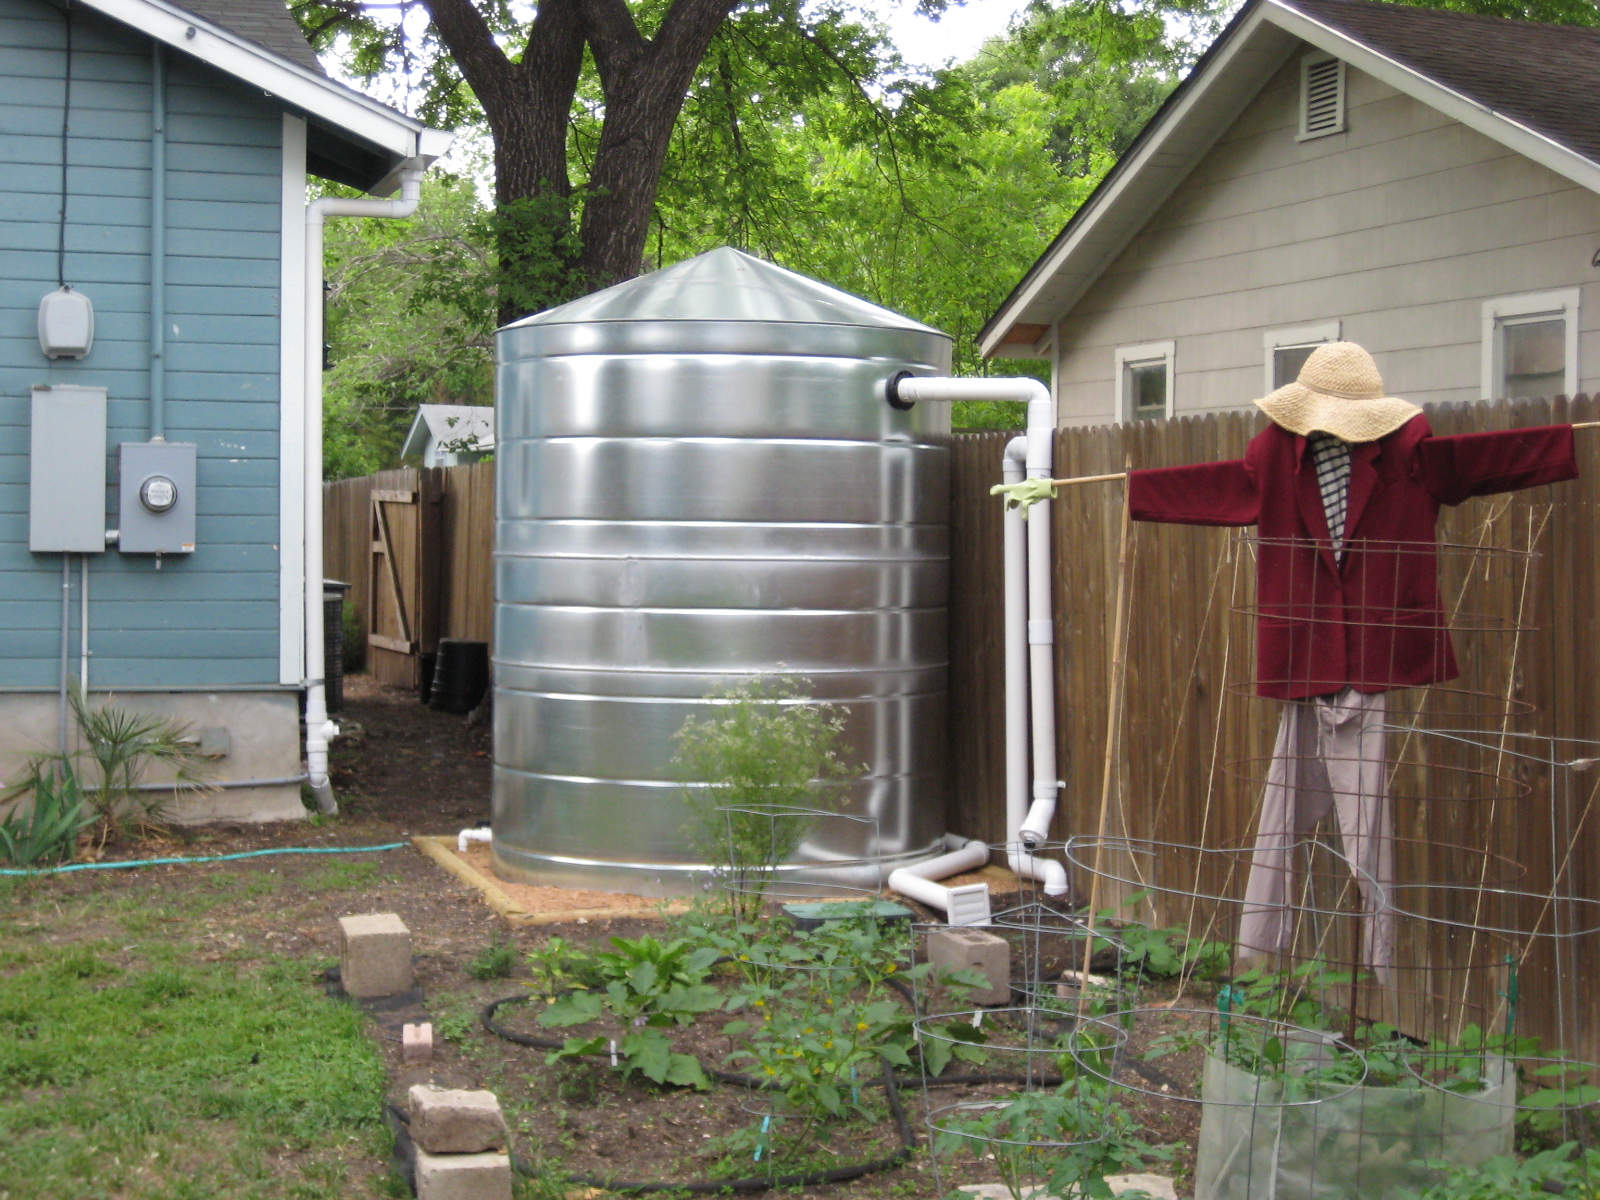 Rainwater collection and urban vegetable gardening